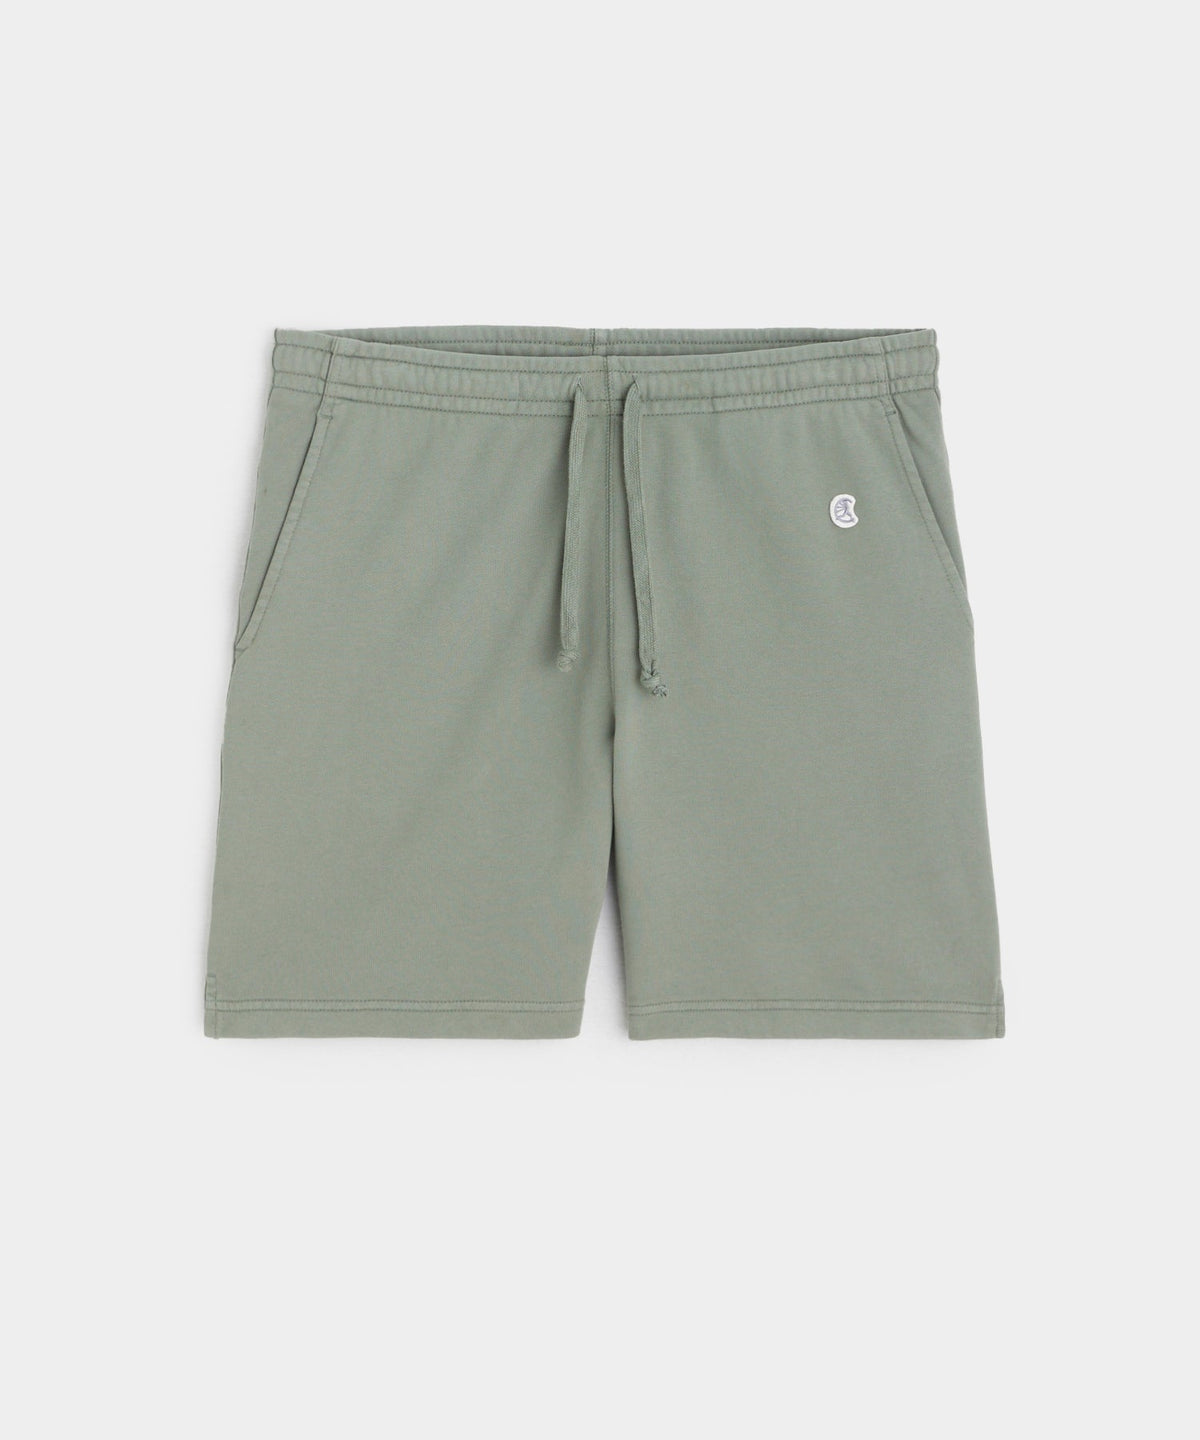 7" Midweight Warm Up Short in Green Smoke